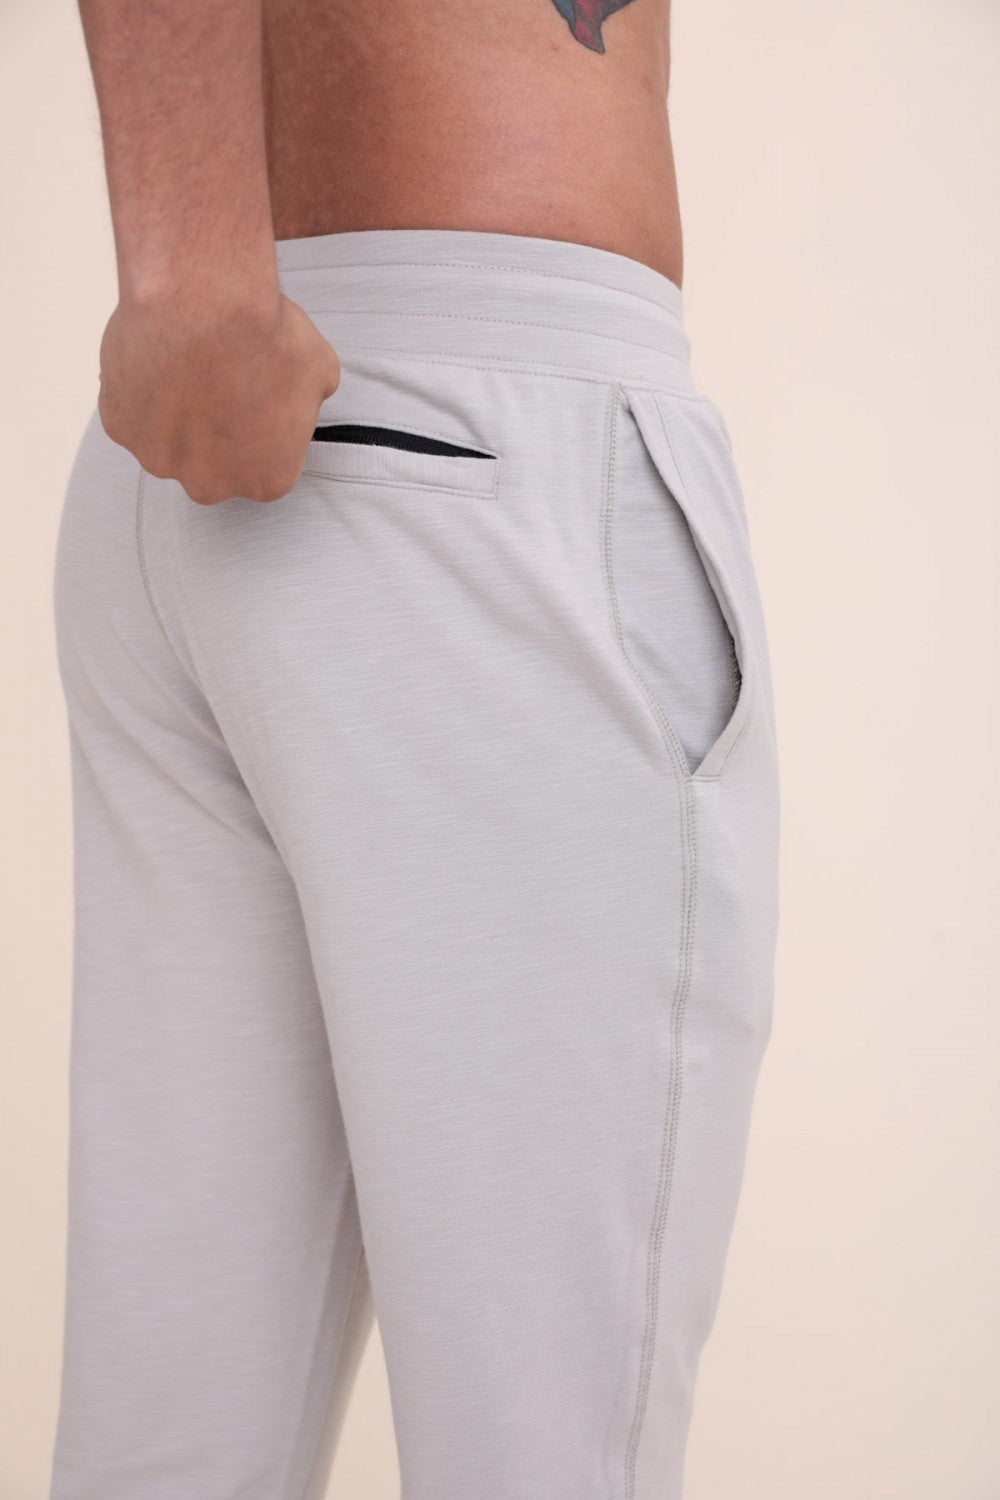 Keep it simple with these elevated joggers. They have a drawstring waistband, single zipper back pocket, and a stitch part way up the back of the legs.